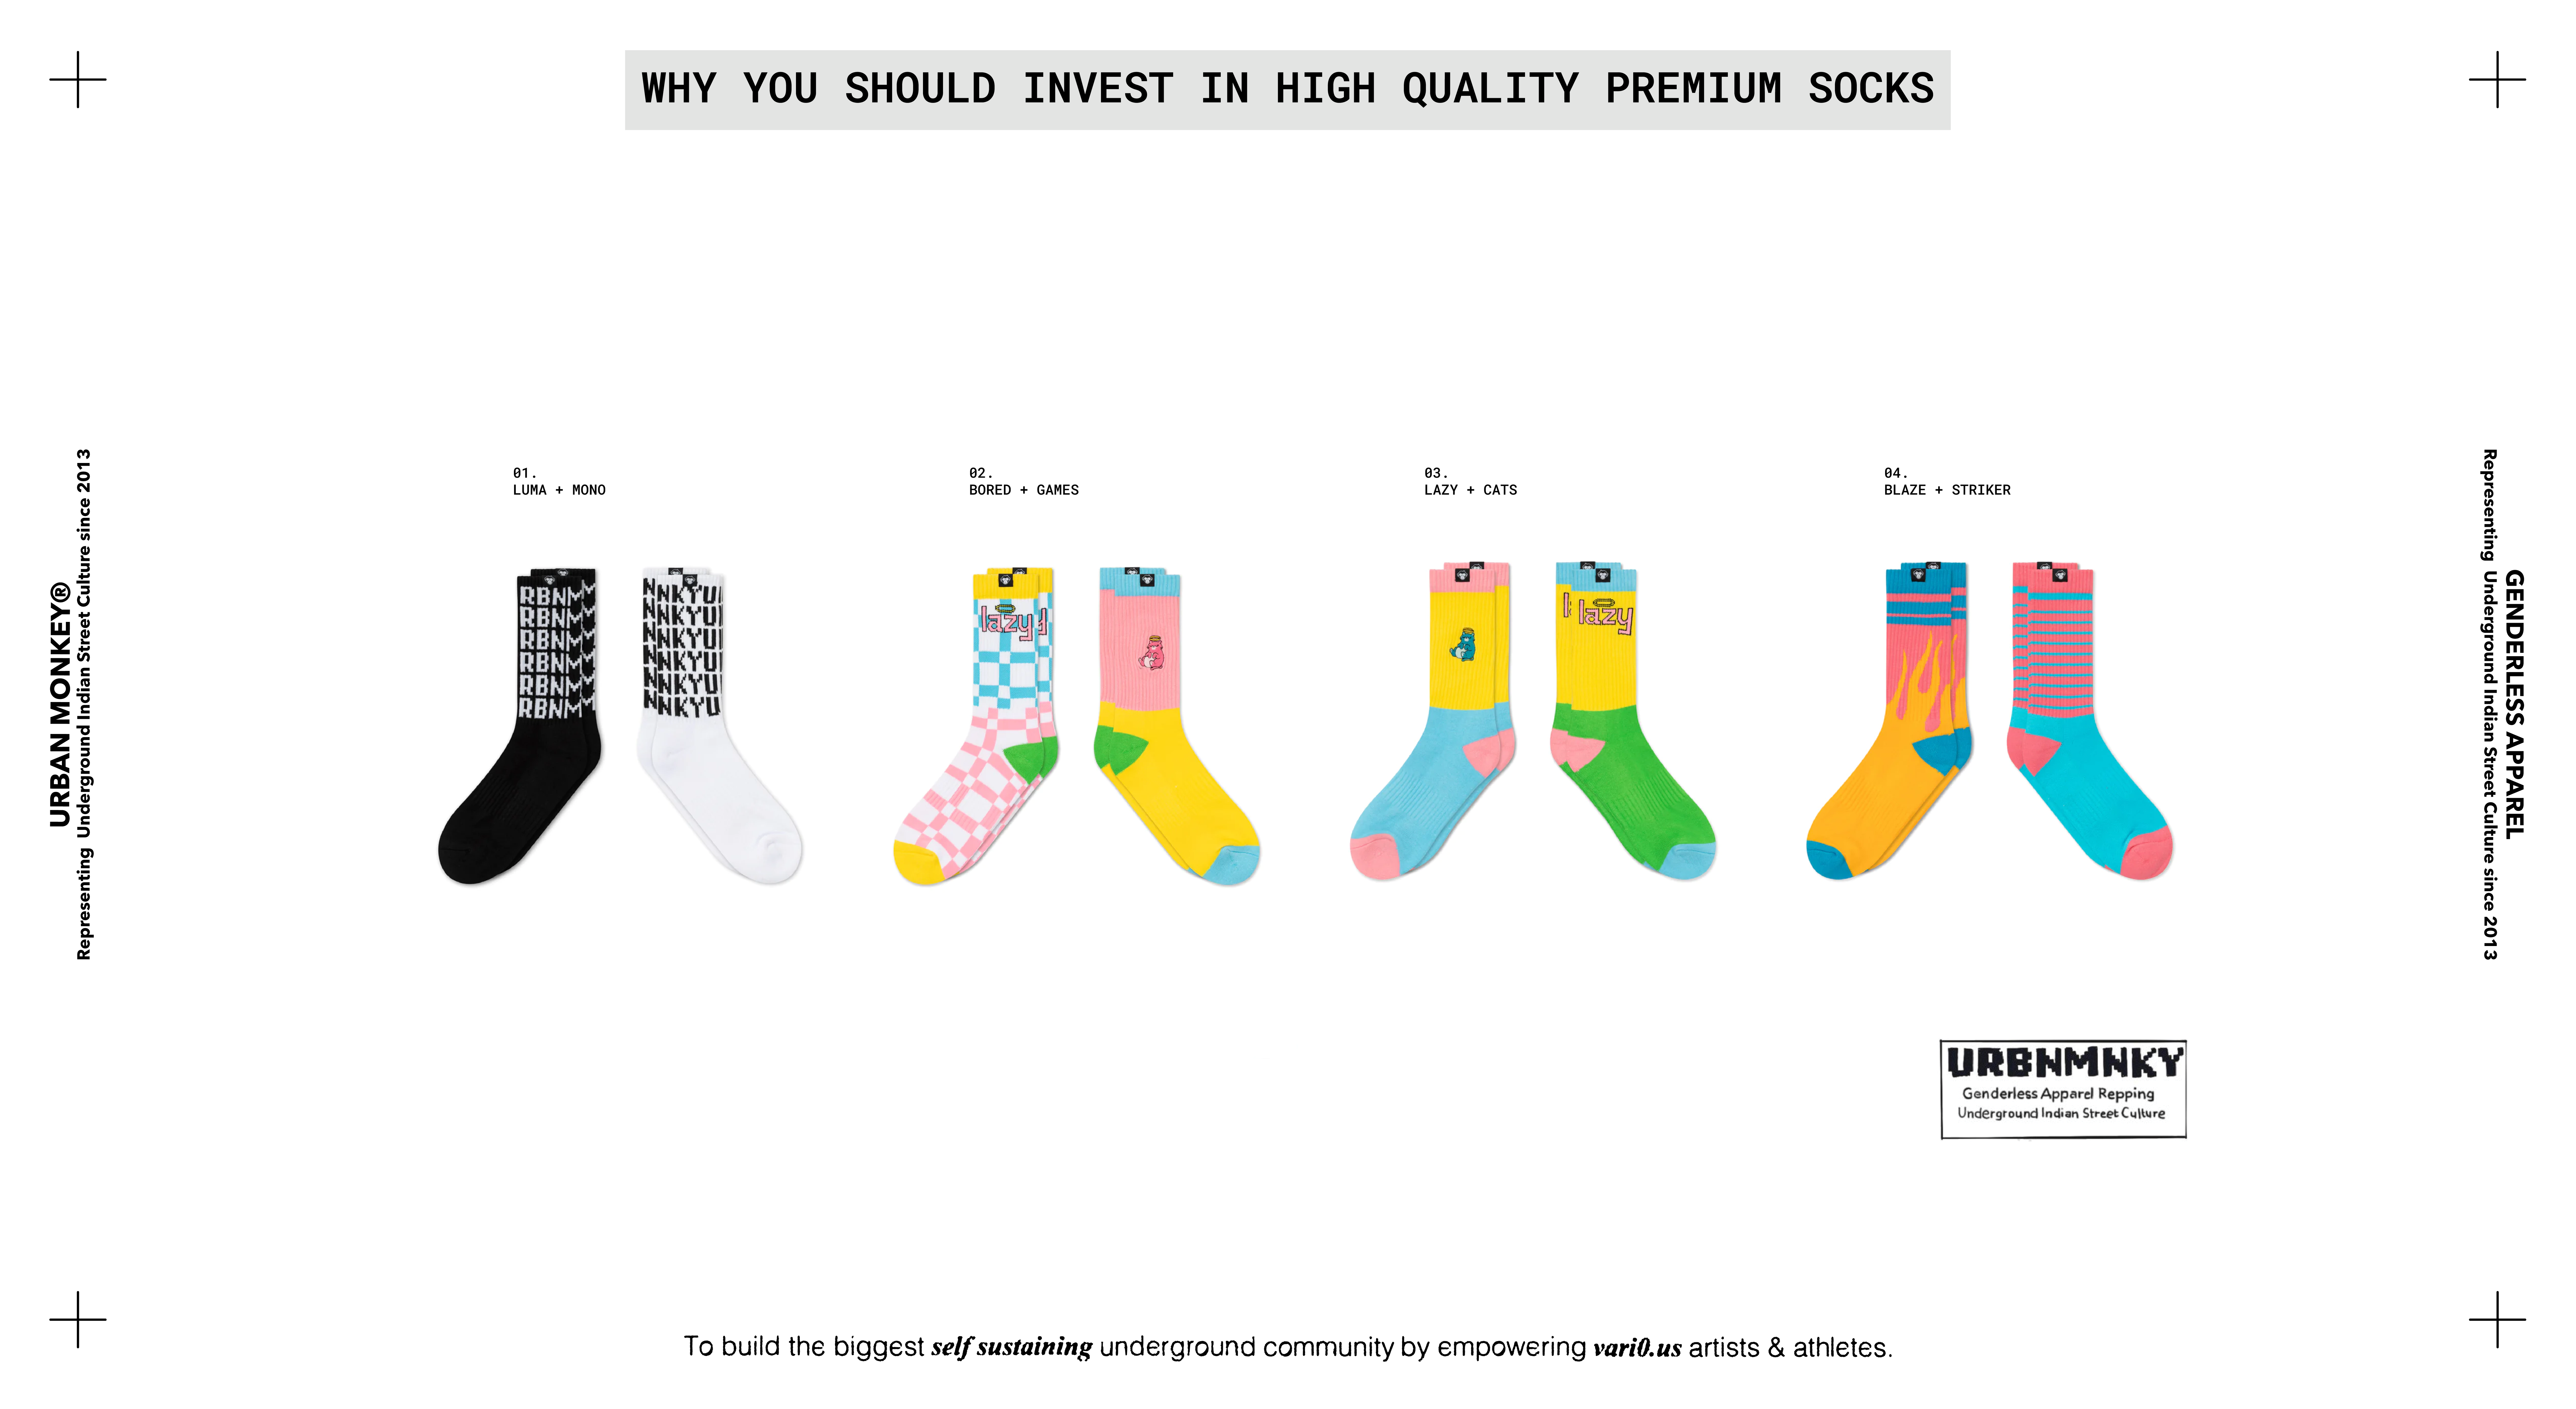 Why You Should Invest in High-Quality Premium Socks